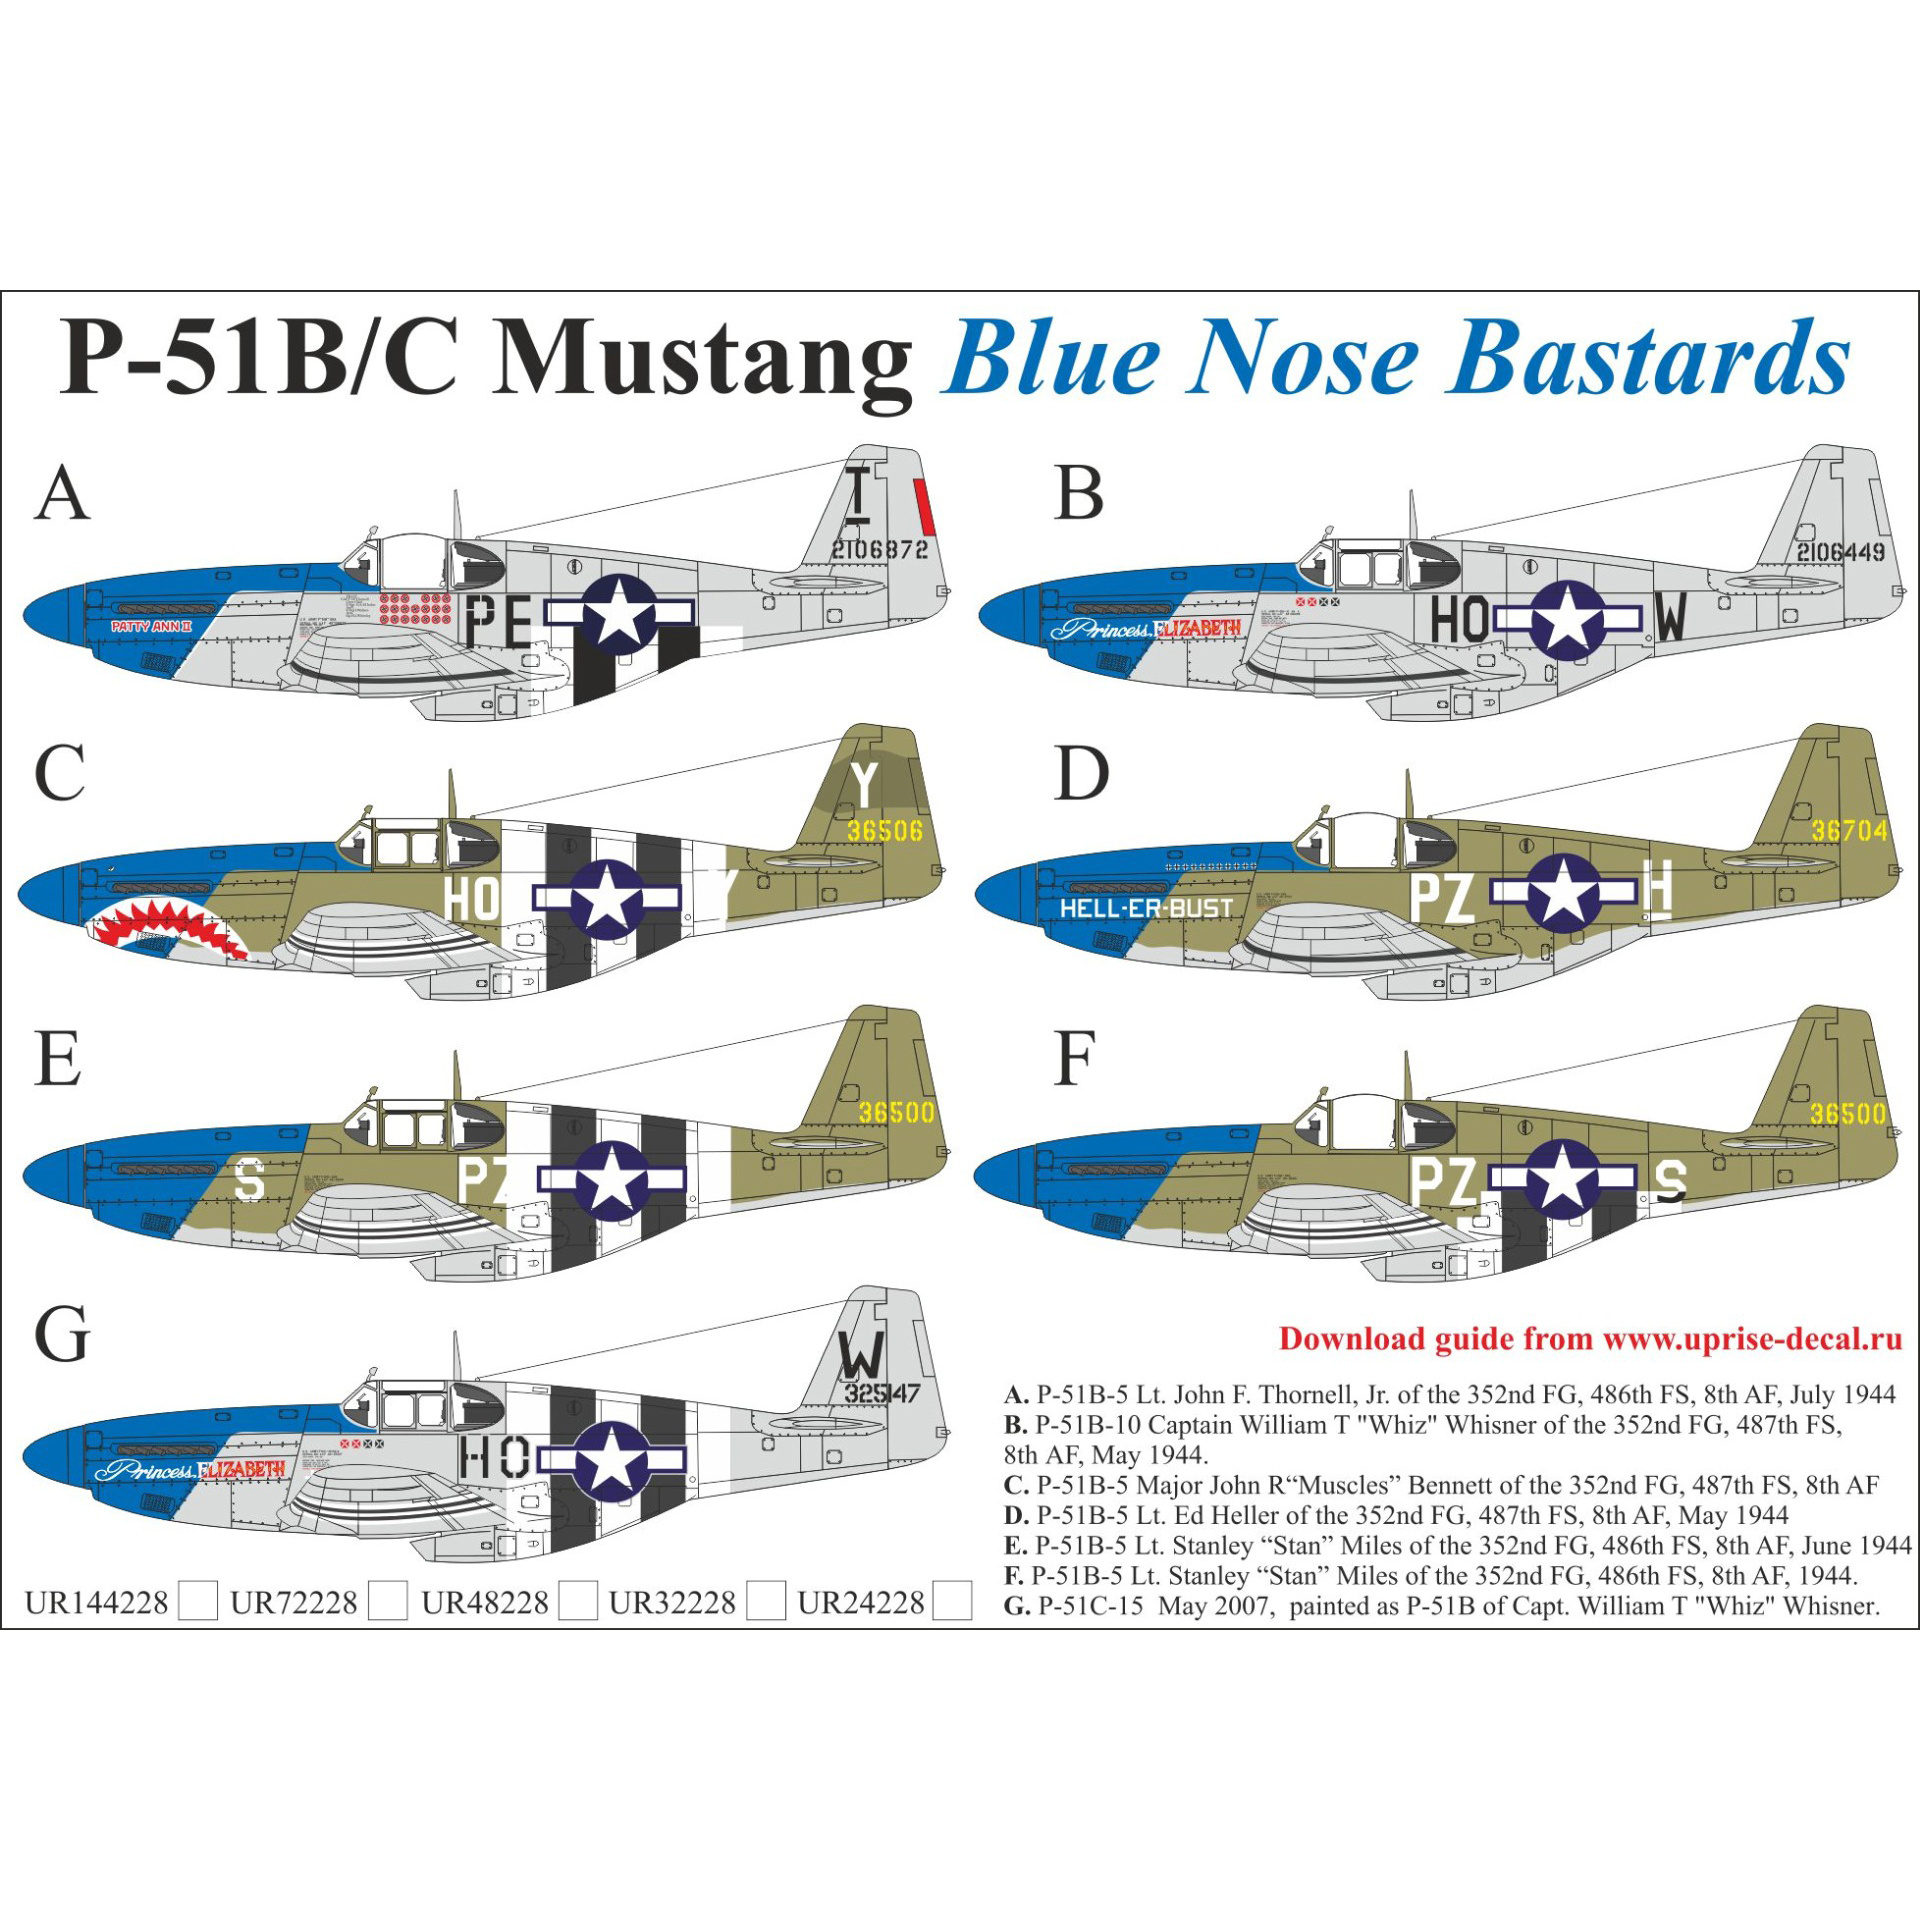 UR48228 Sunrise 1/48 Decal for P-51B/C Mustang Blue Nose Bastards, since. inscriptions, FFA (removable lacquer substrate)